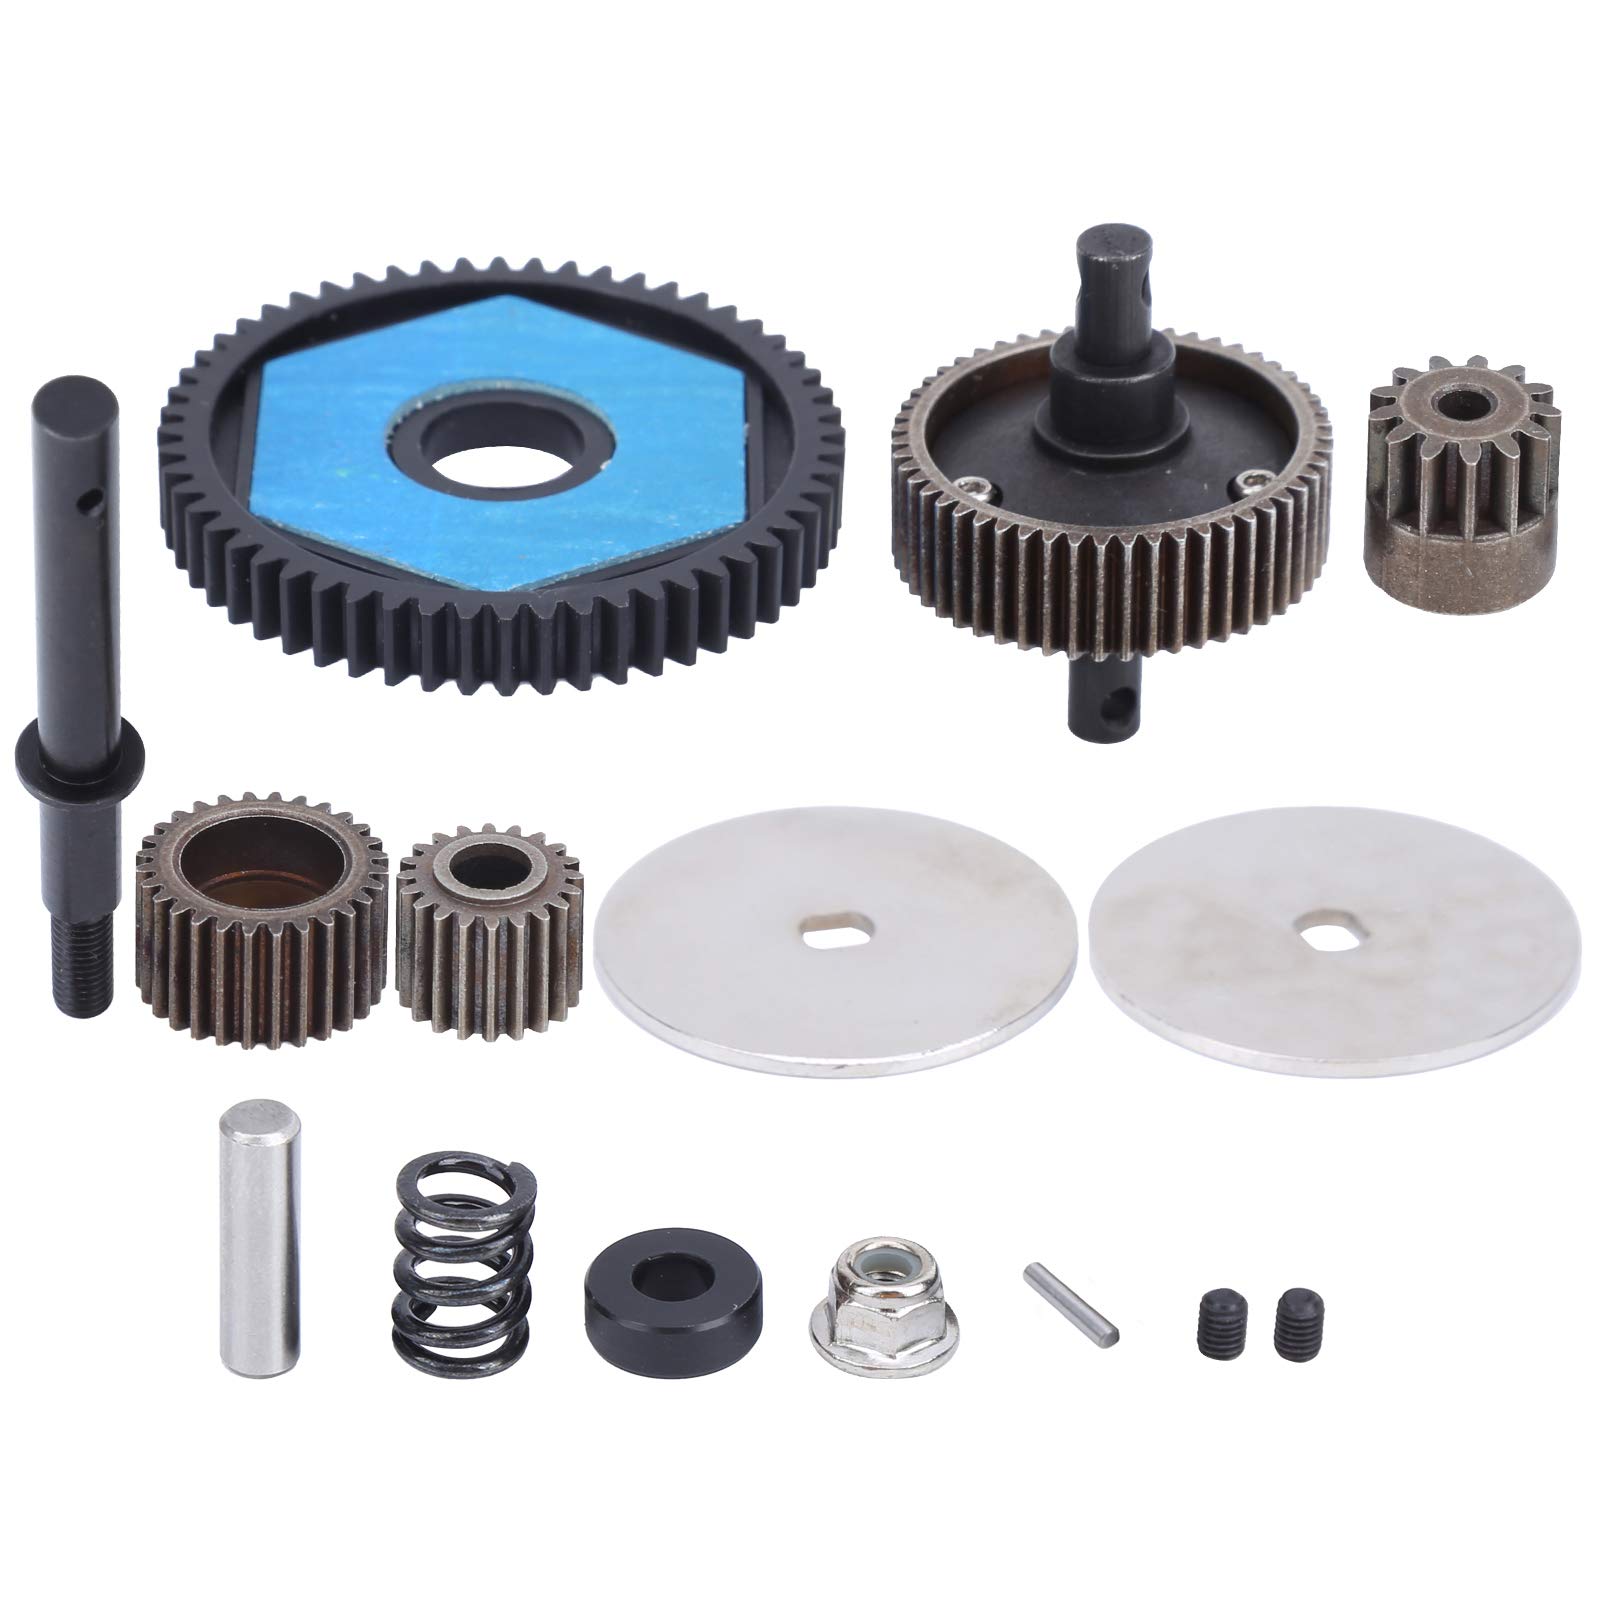 RC Car Transmission Gears with Motor Gear for Axial SCX10/SCX10 II 90046 90047, High Strength Steel Transmission Gears